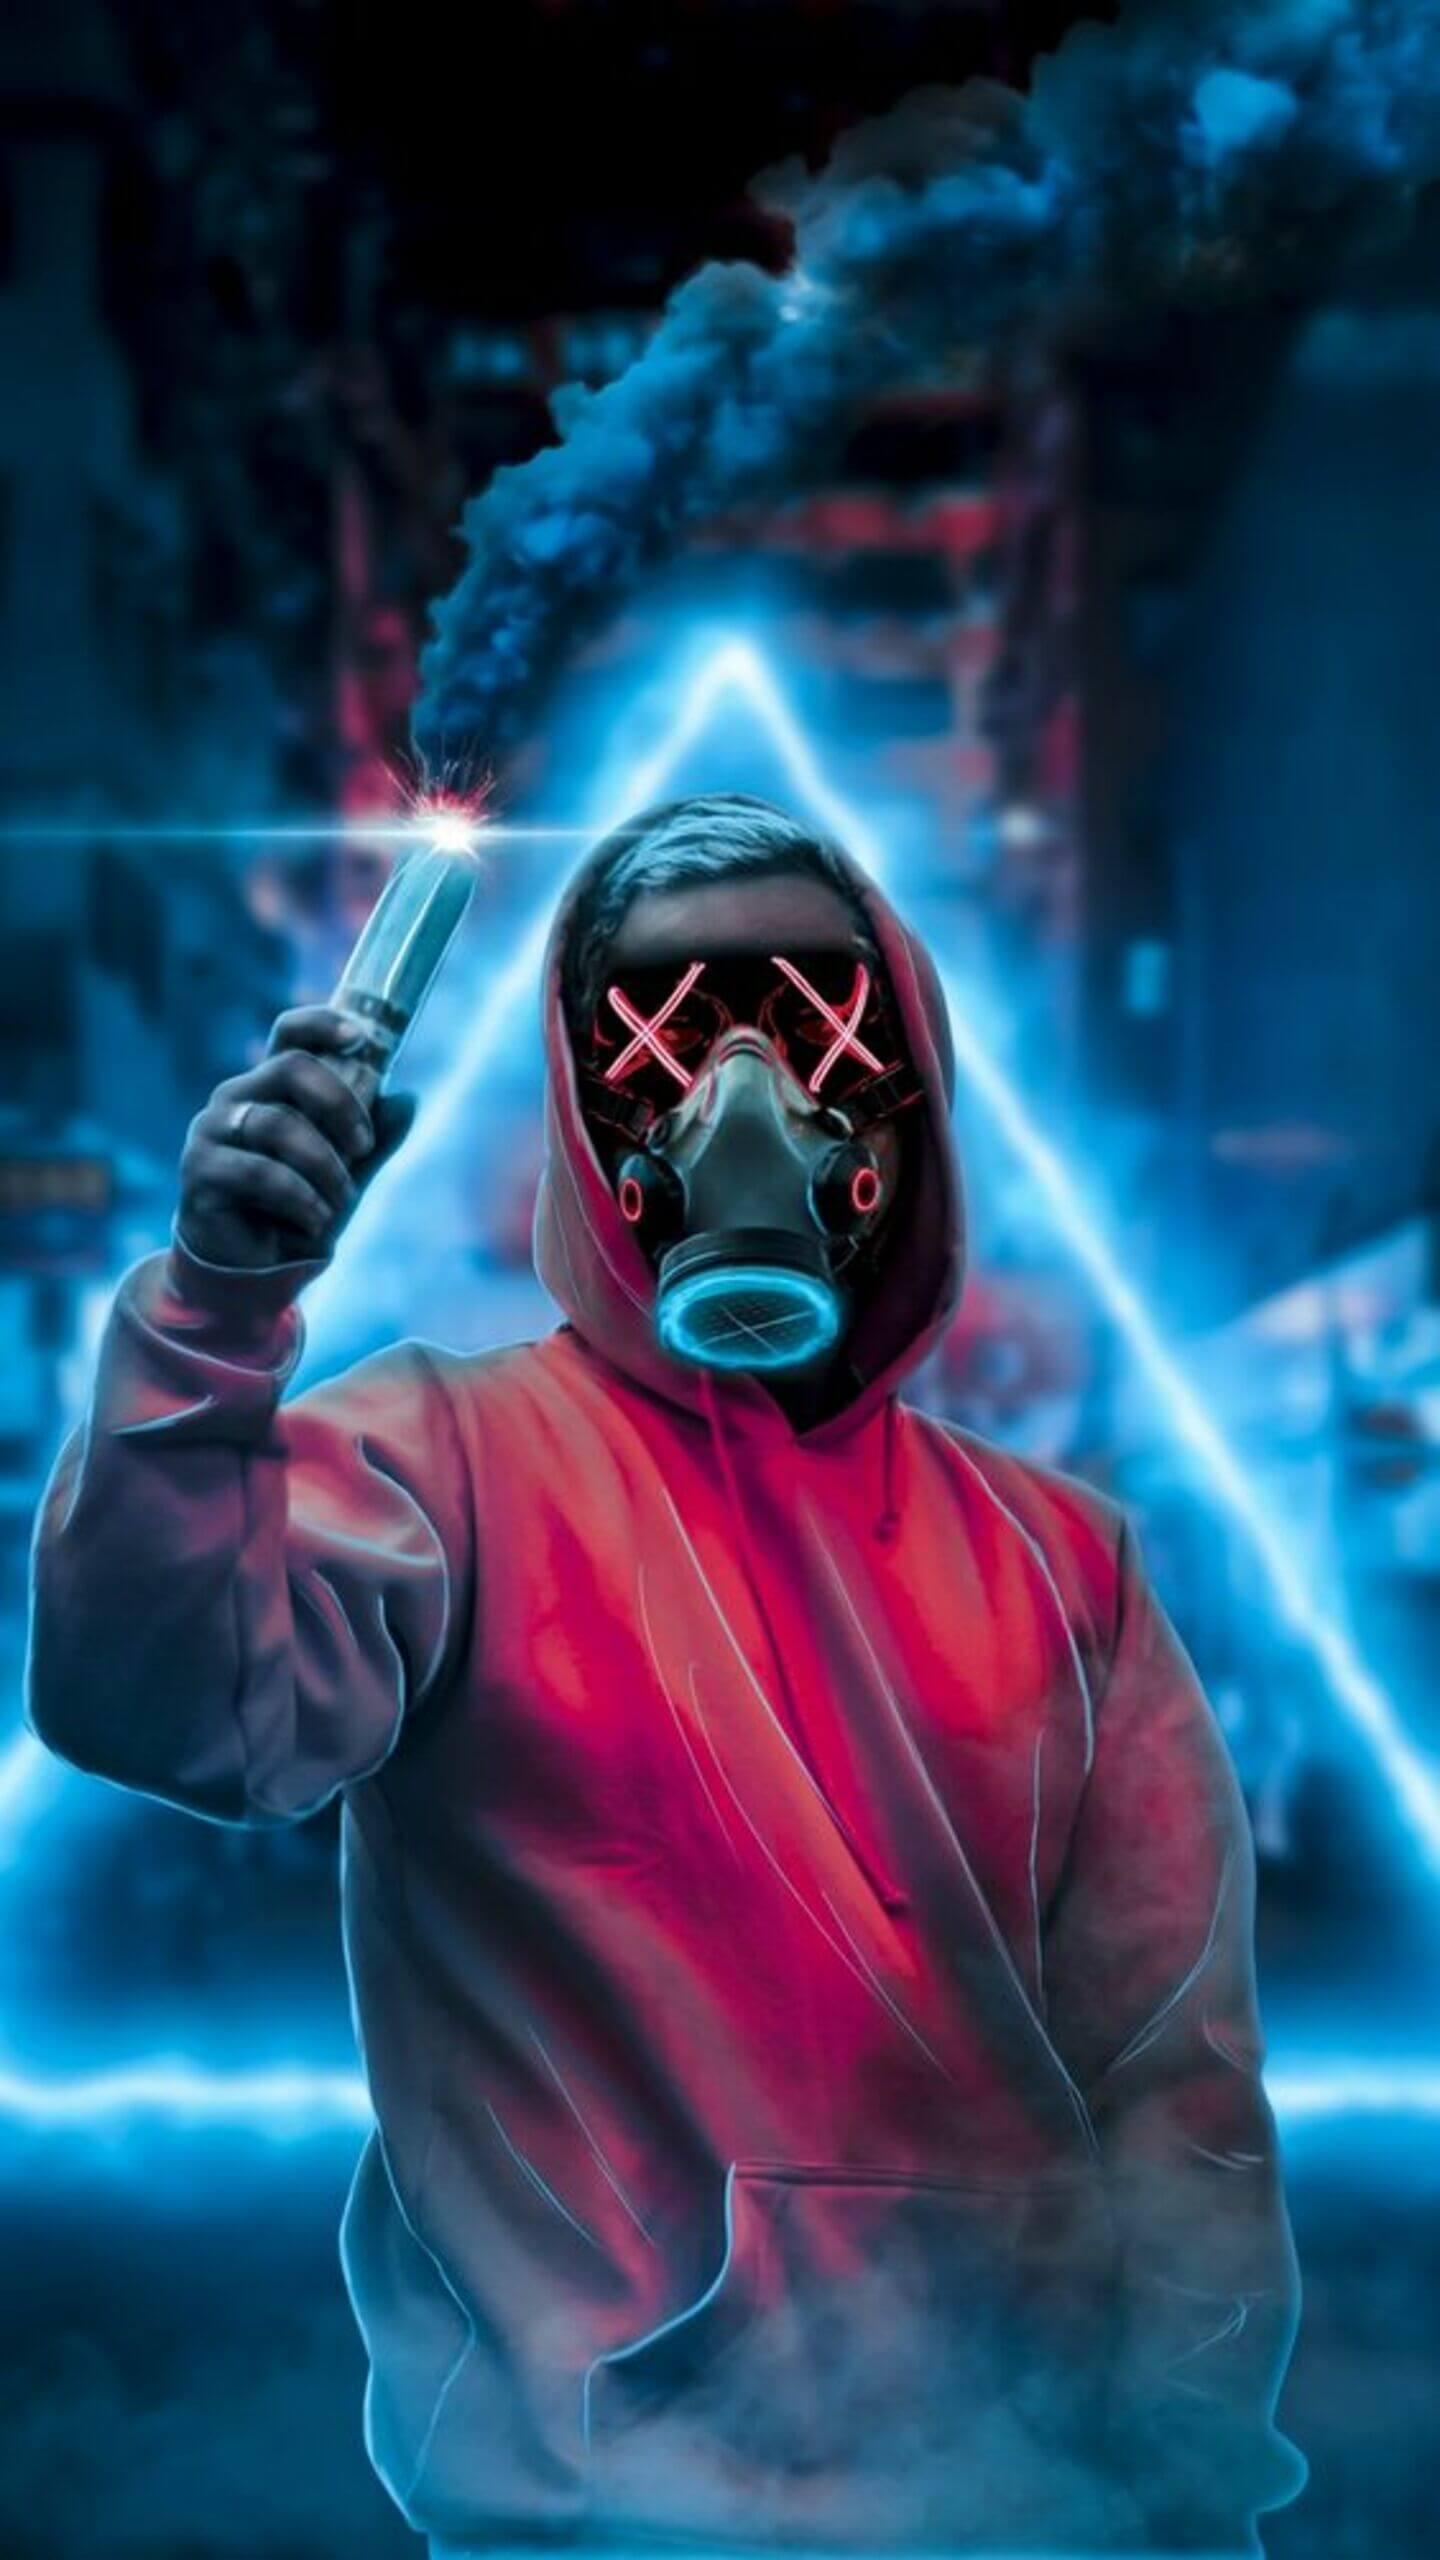 Led Purge Mask Wallpaper HD 2020 for Android